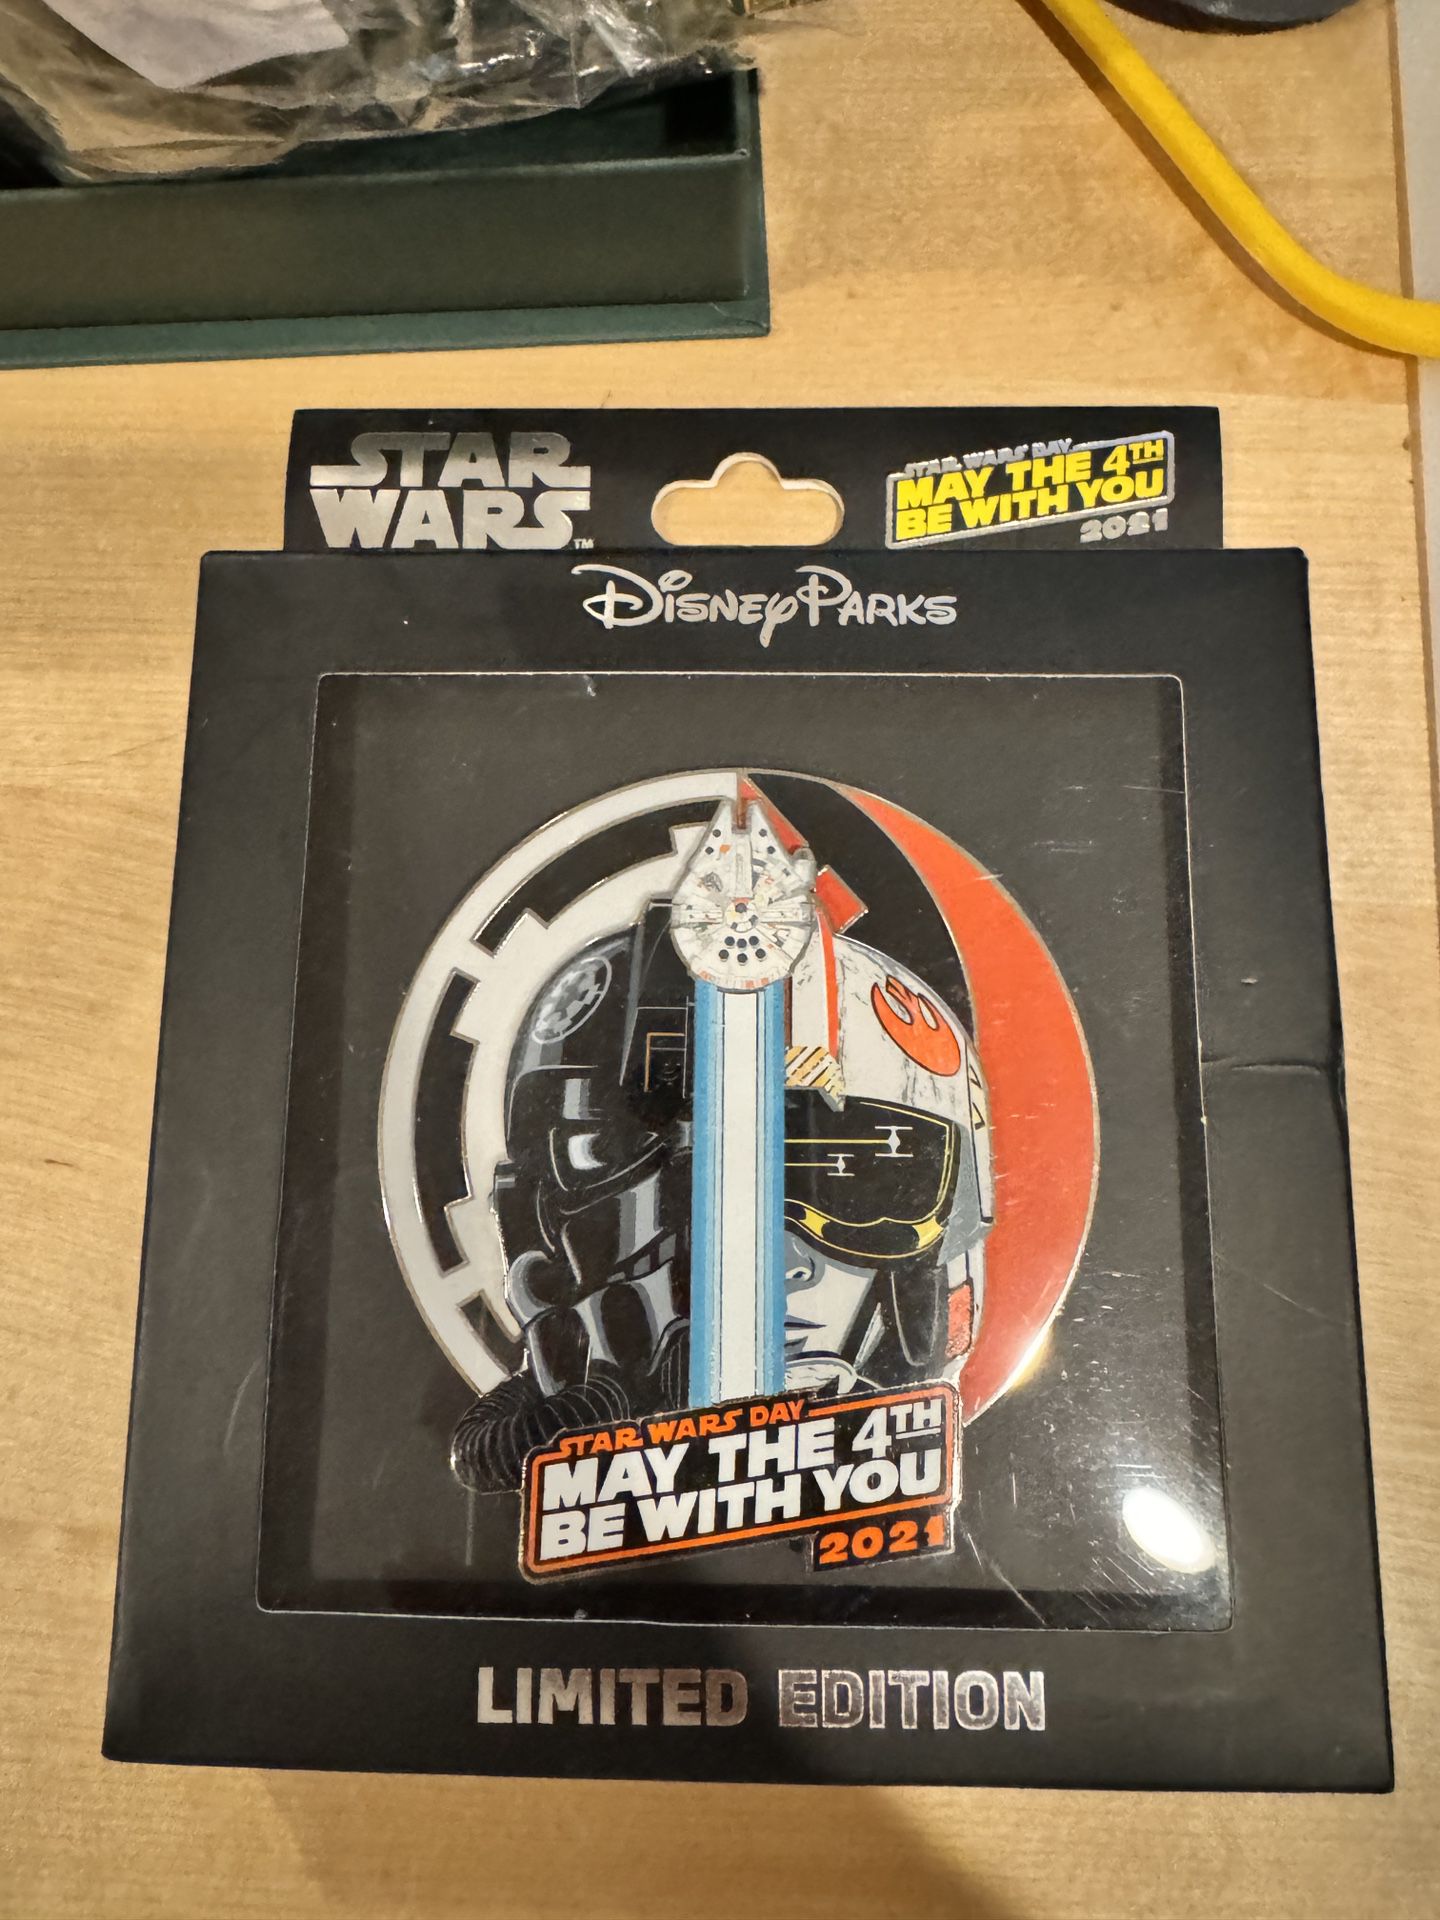 Disney Star Wars May The 4th Be With You 2021 Jumbo Pin Limited Edition 1/1000